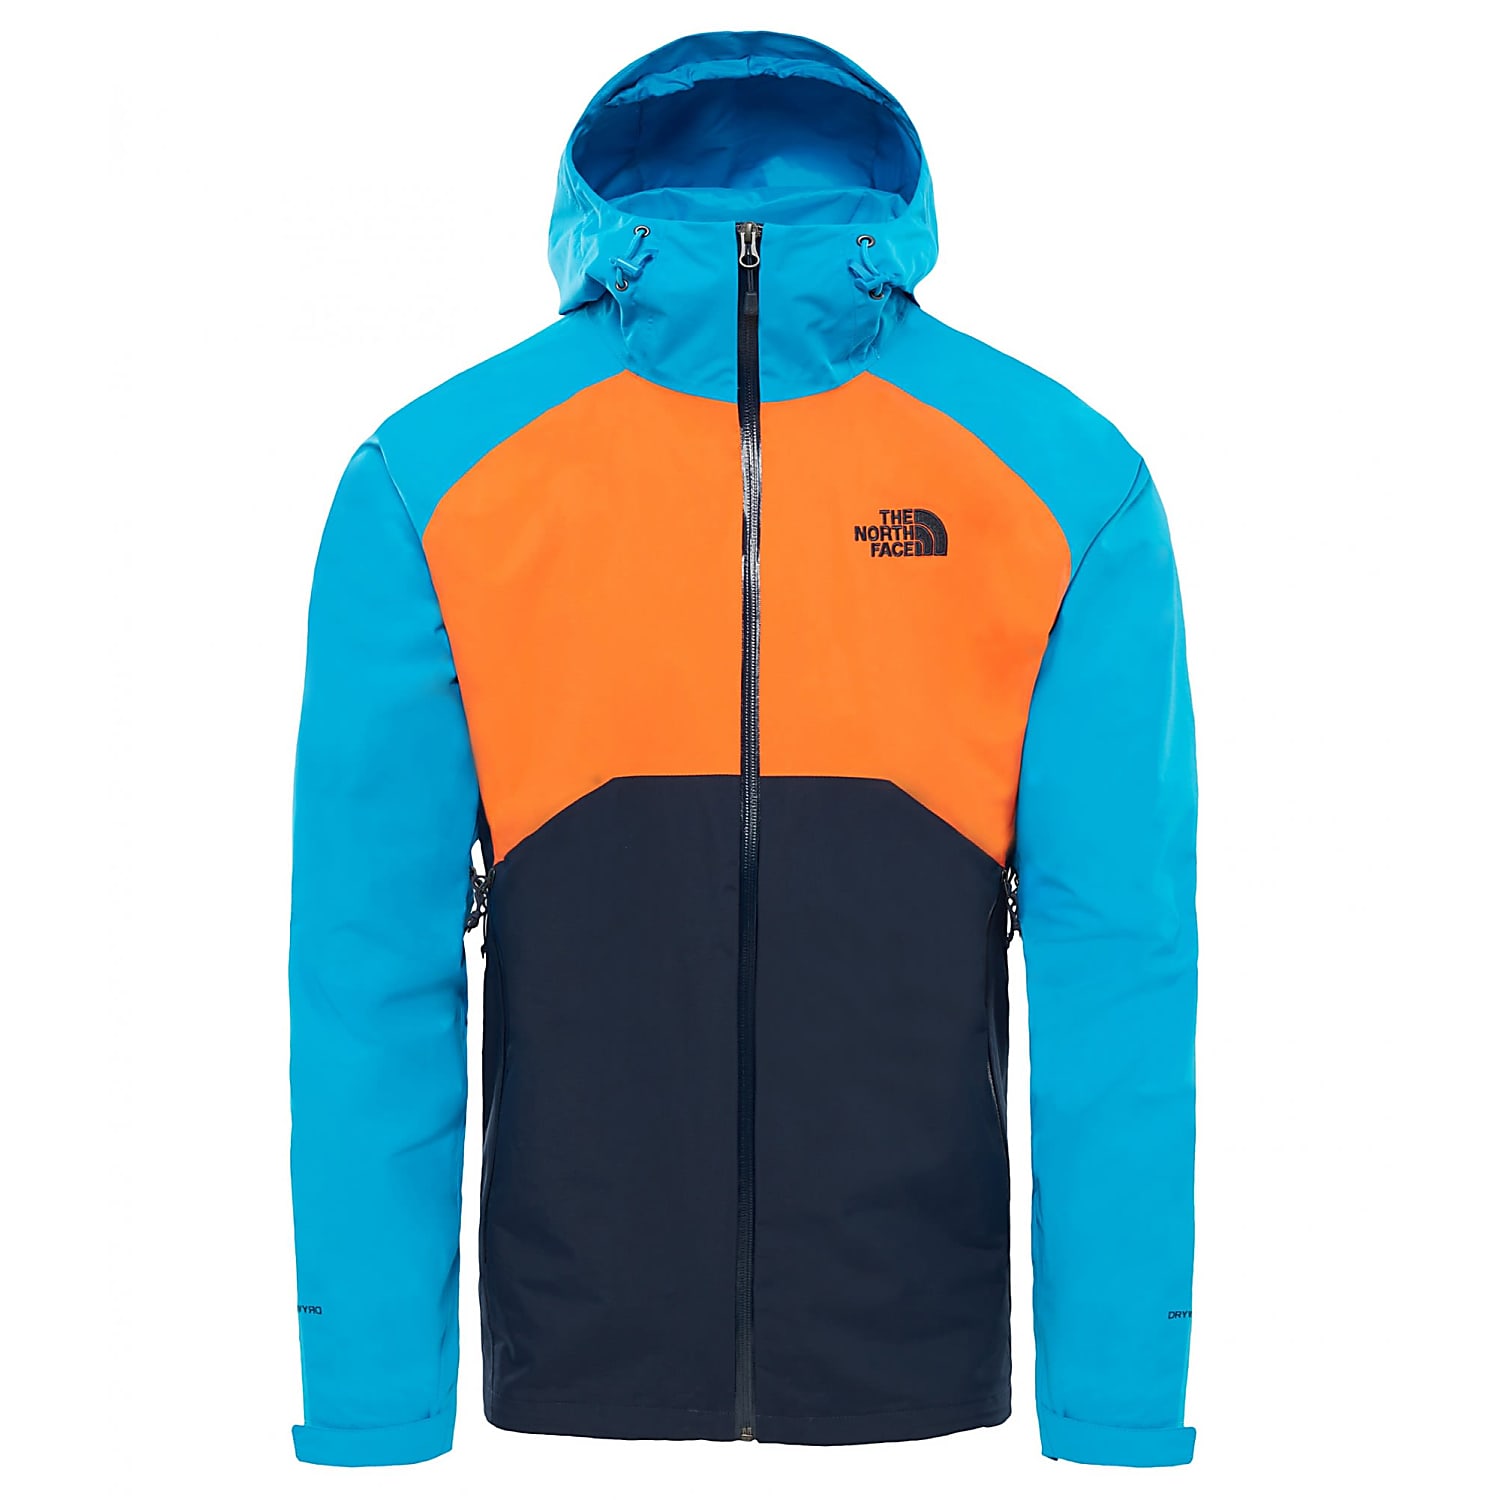 The North Face M STRATOS JACKET, Urban Navy - Persian Orange - Hyper Blue - and cheap - www.exxpozed.com